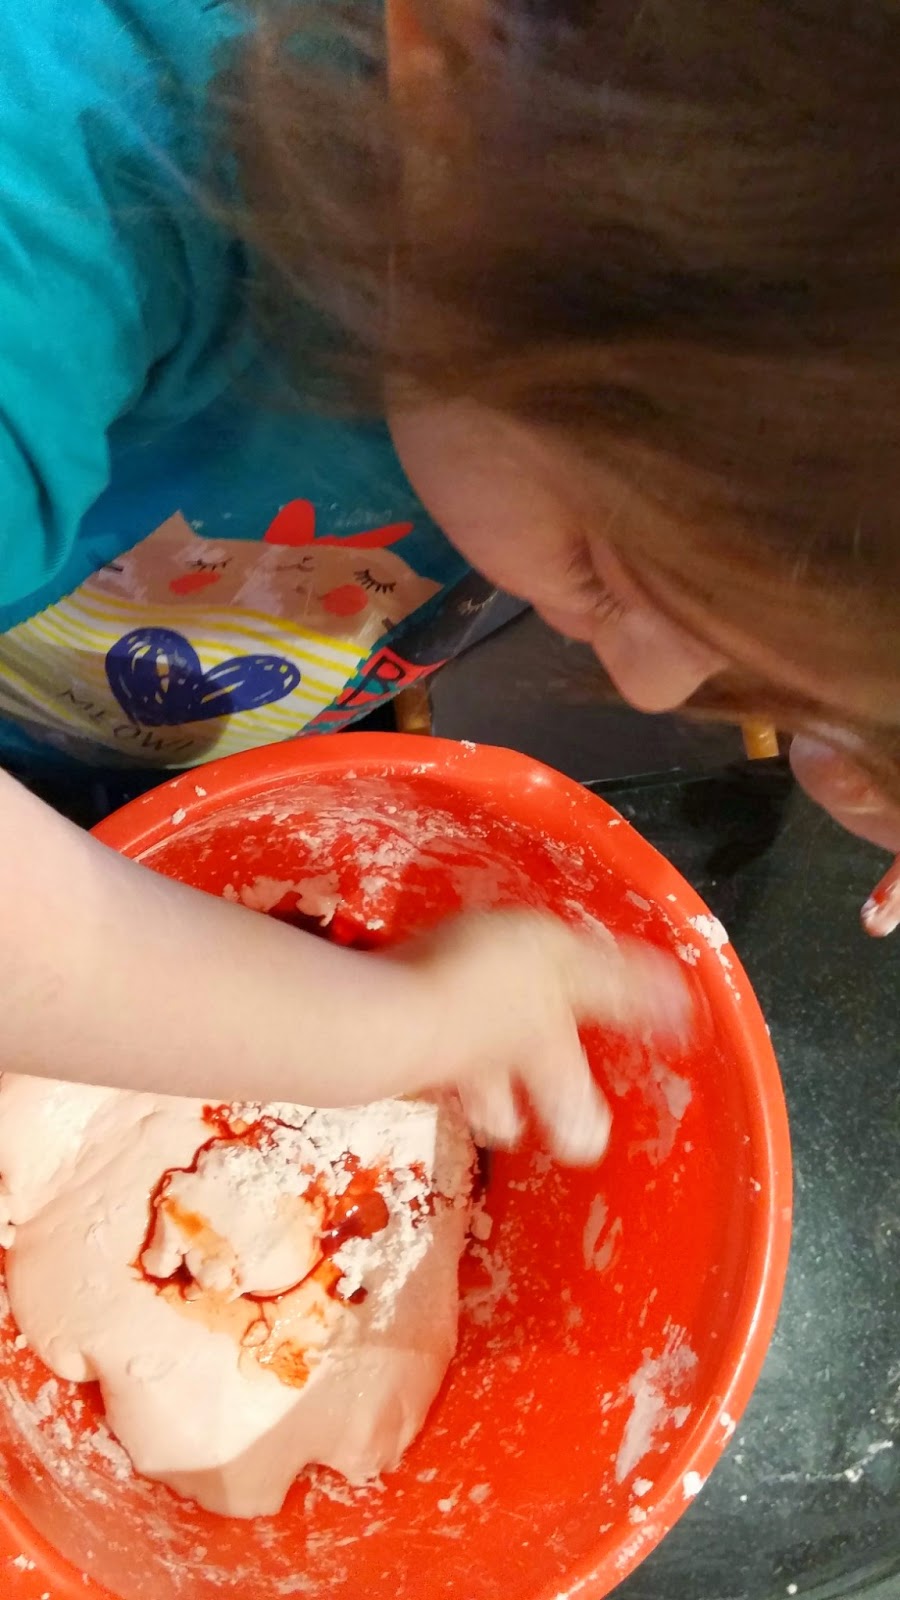 eldest with messy play